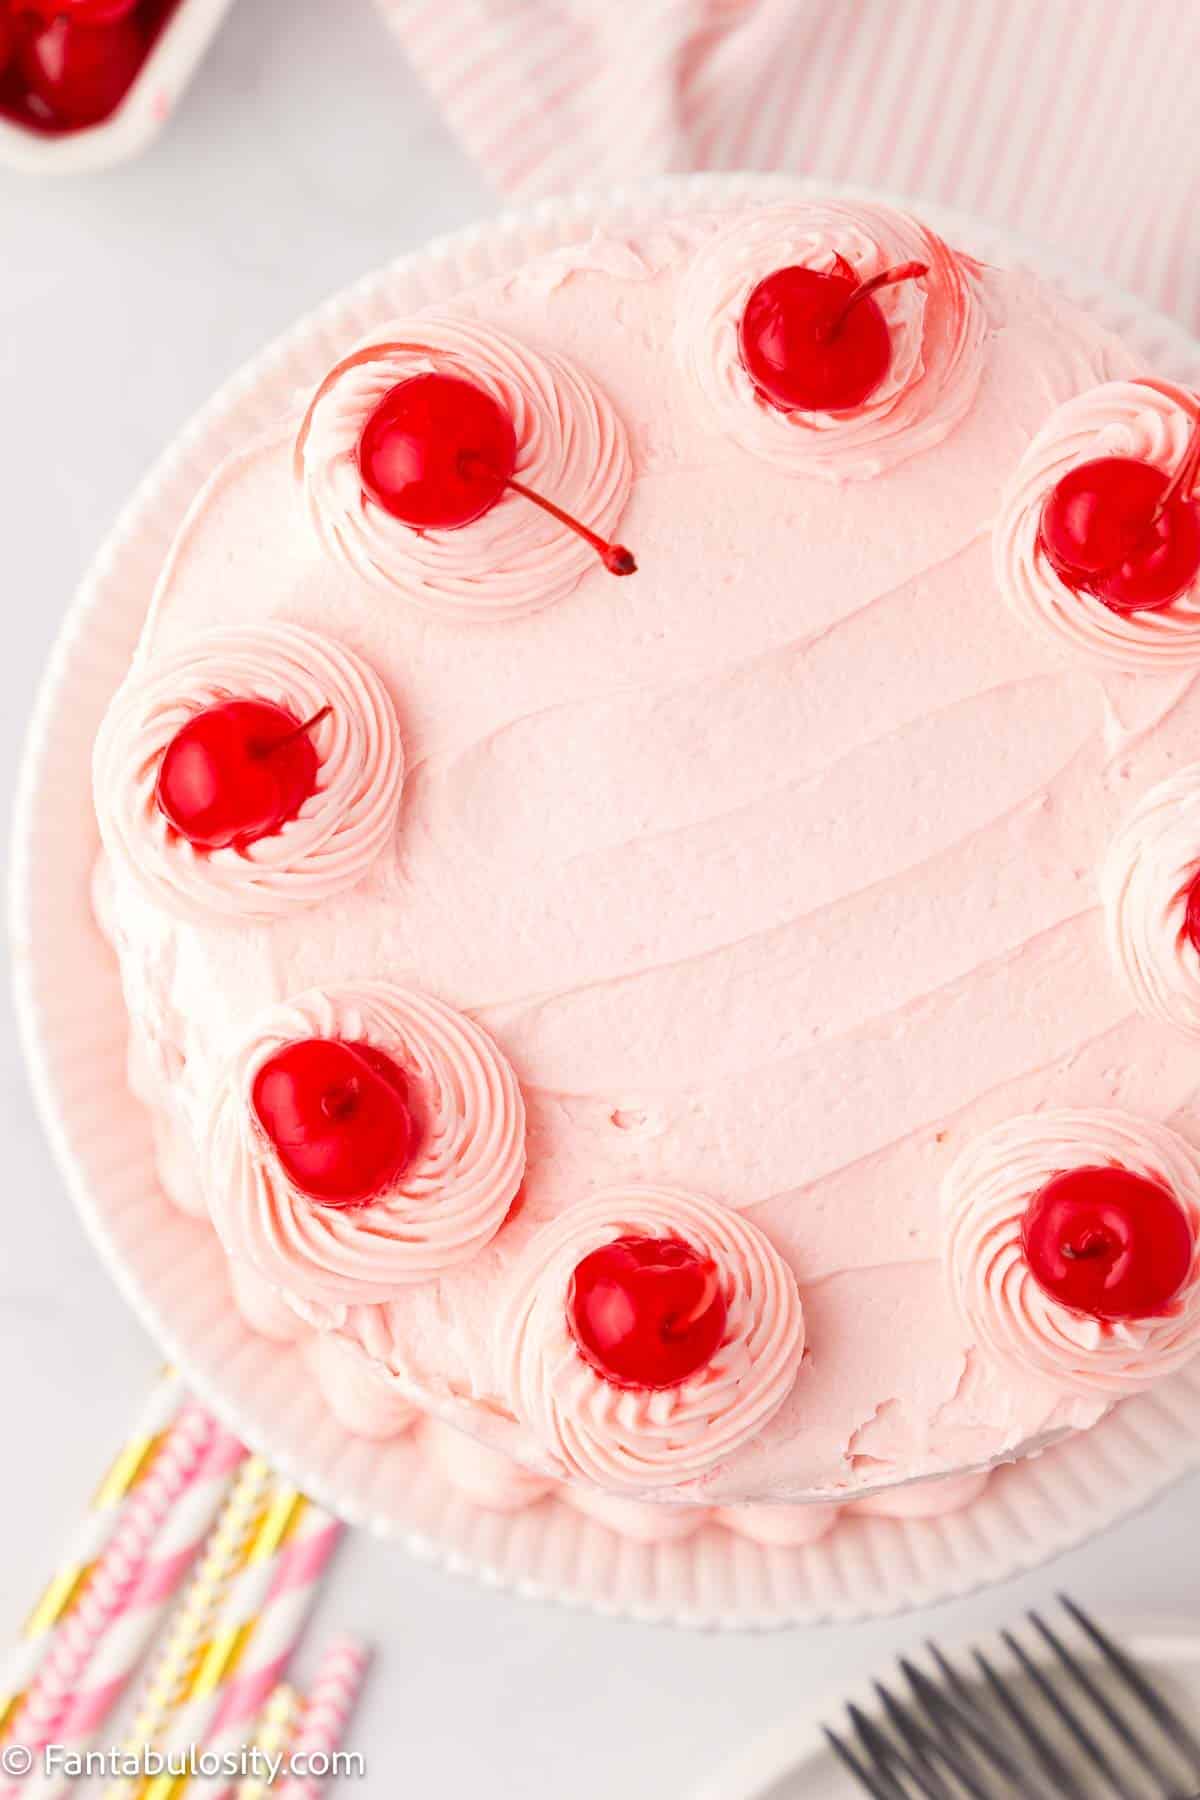 Top of cherry chip cake with cherries on top.